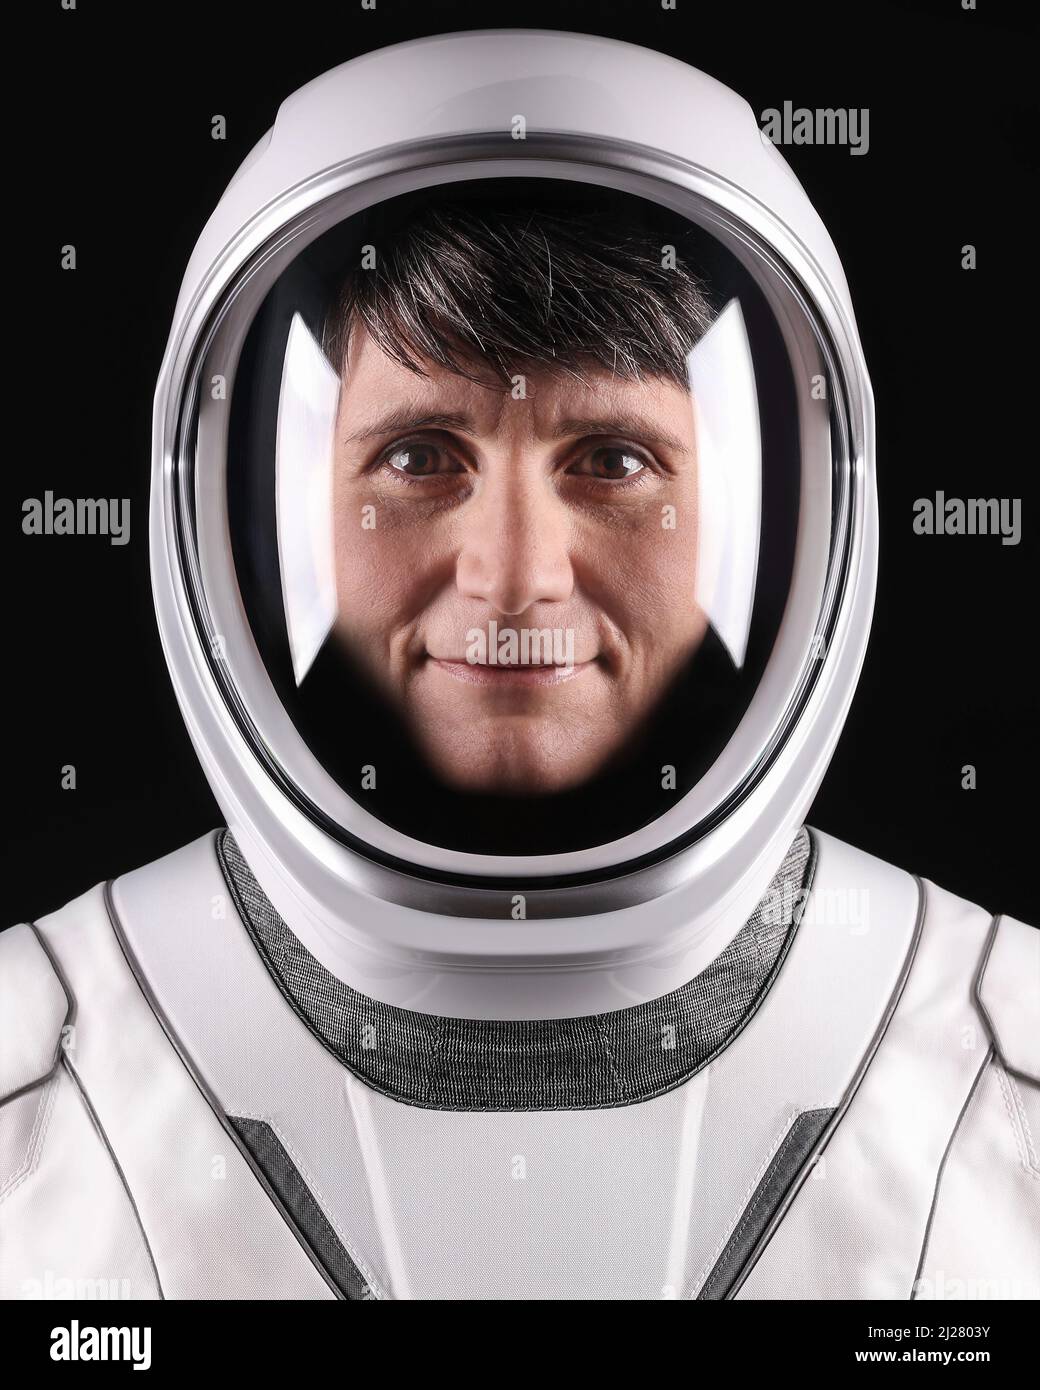 Hawthorne, California, USA. 21st Mar, 2022. Astronaut SAMANTHA CRISTOFORETTI of ESA (European Space Agency), SpaceX Crew-4 Mission Specialist, poses for a portrait in her pressure suit at SpaceX headquarters in Hawthorne. Credit: SpaceX/ZUMA Press Wire Service/ZUMAPRESS.com/Alamy Live News Stock Photo